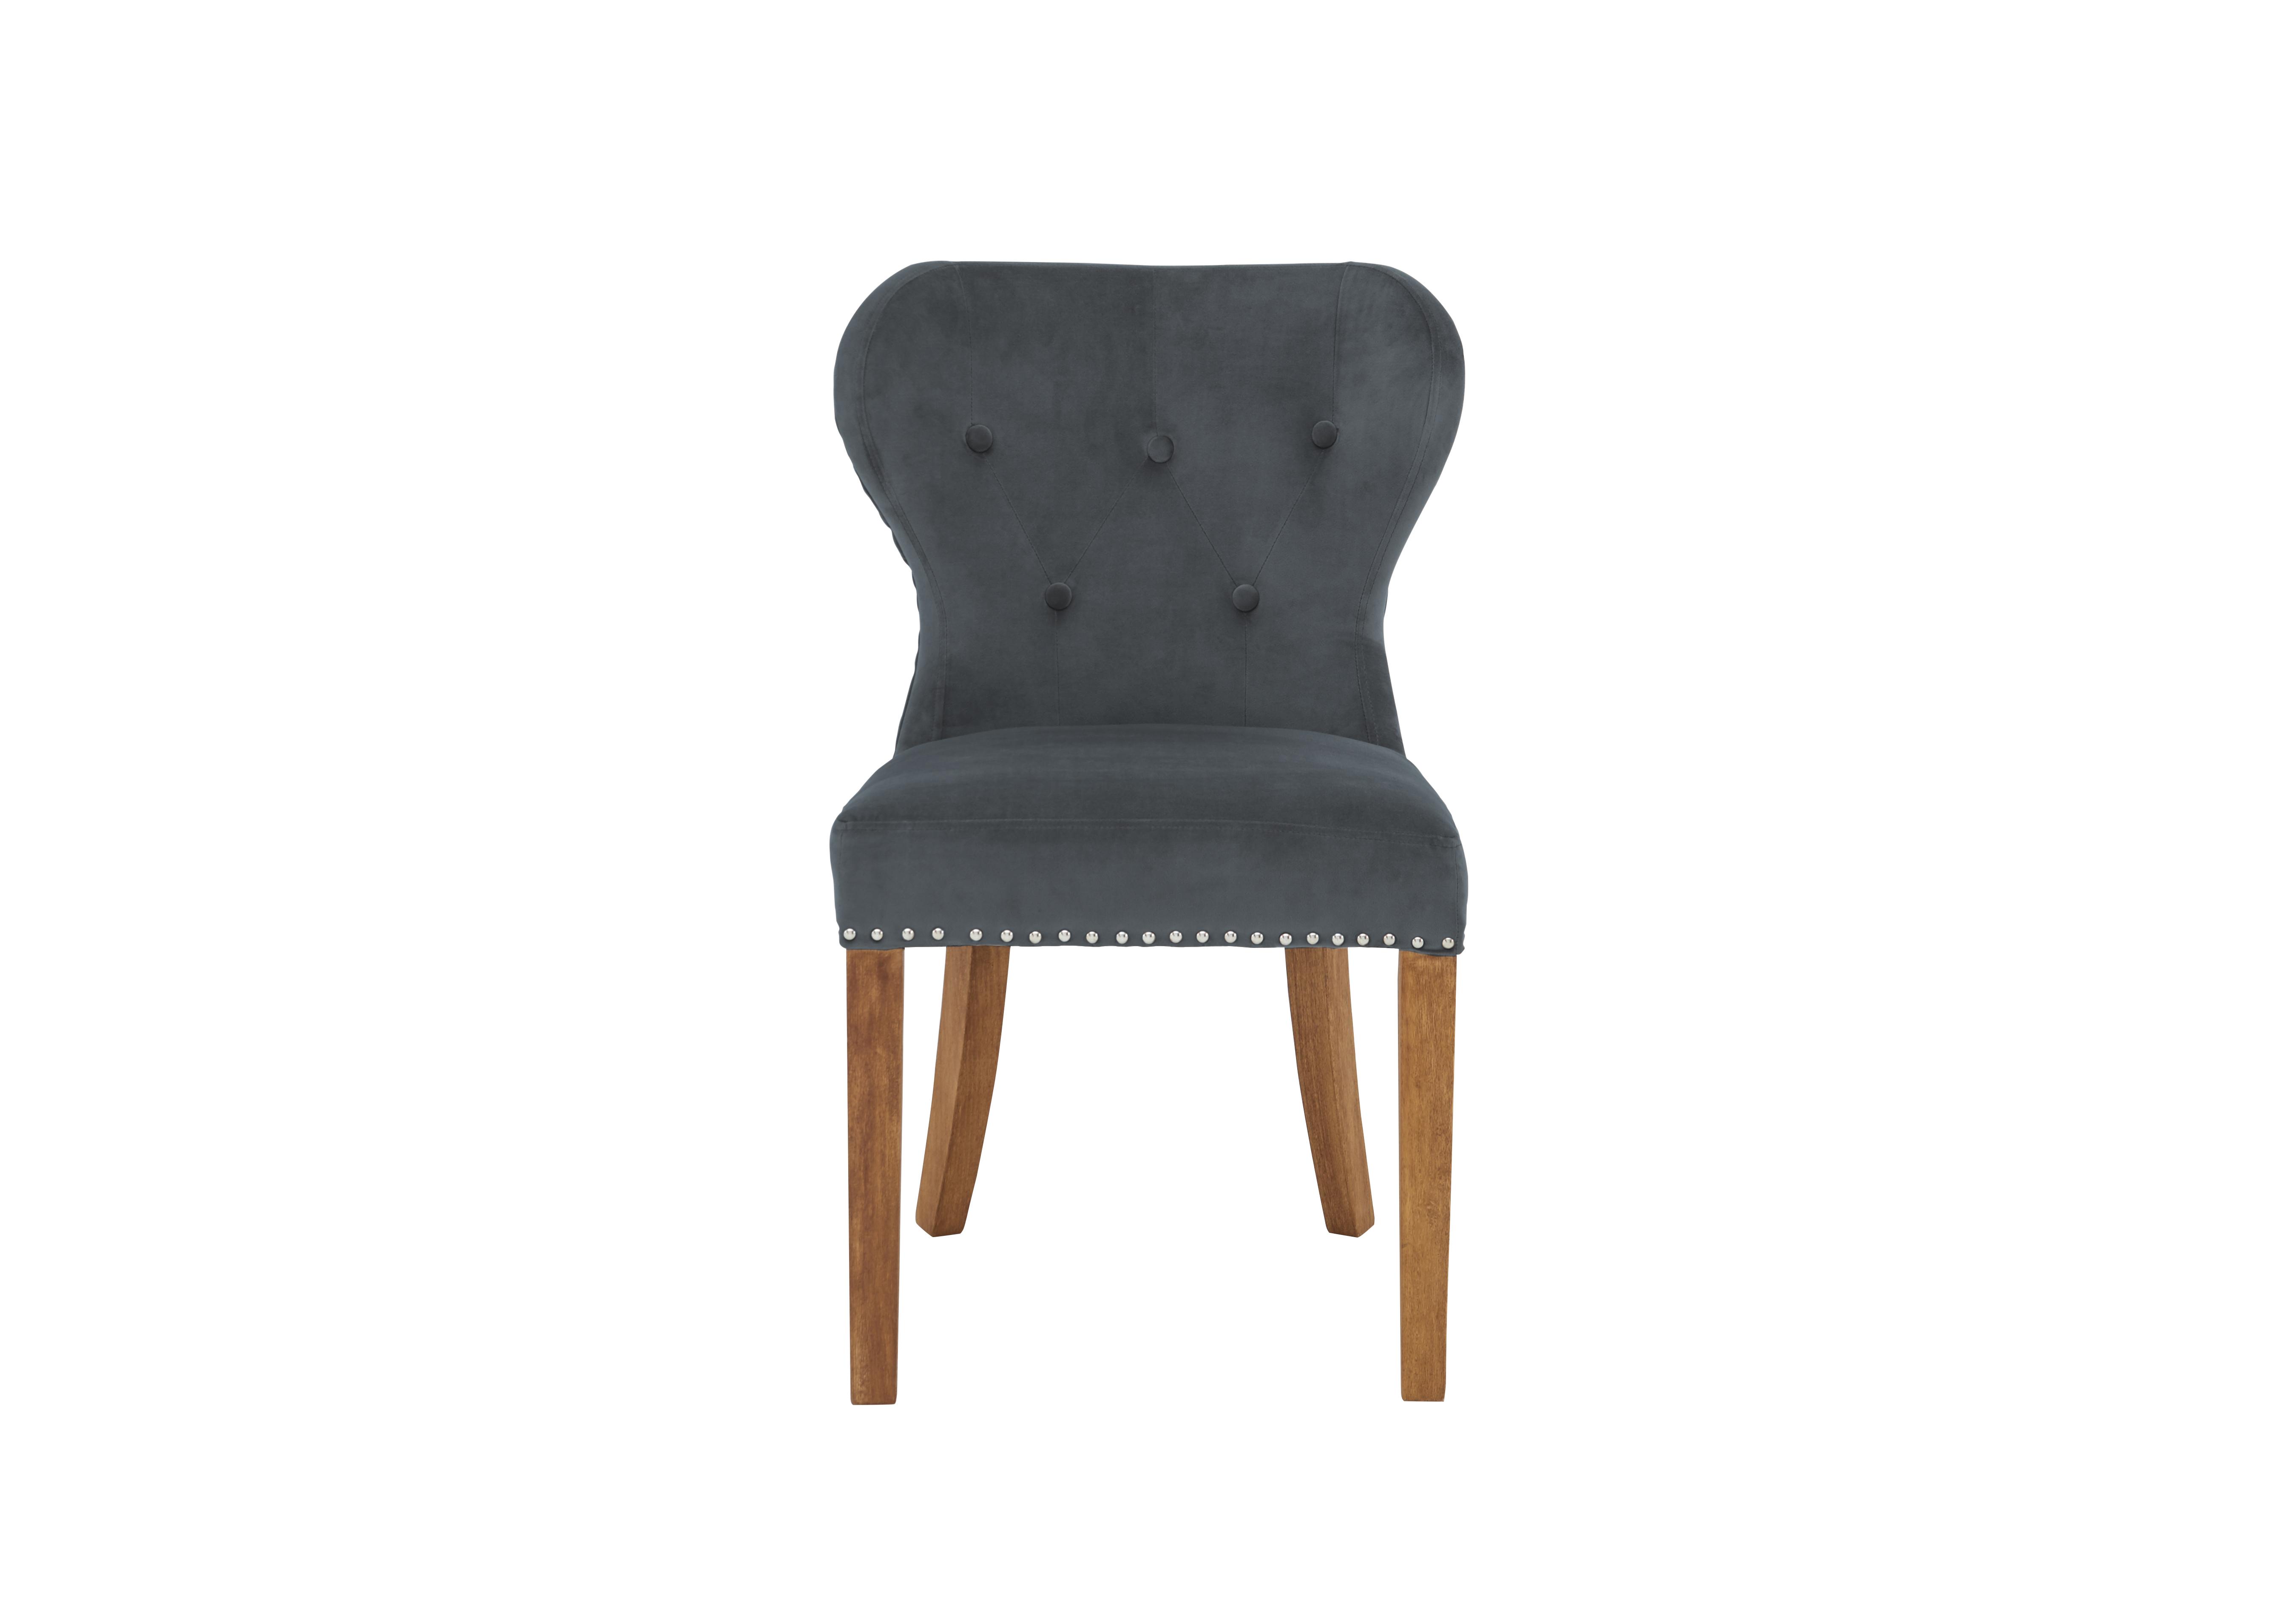 Chennai Upholstered Dining Chair in Grey Chairs on Furniture Village